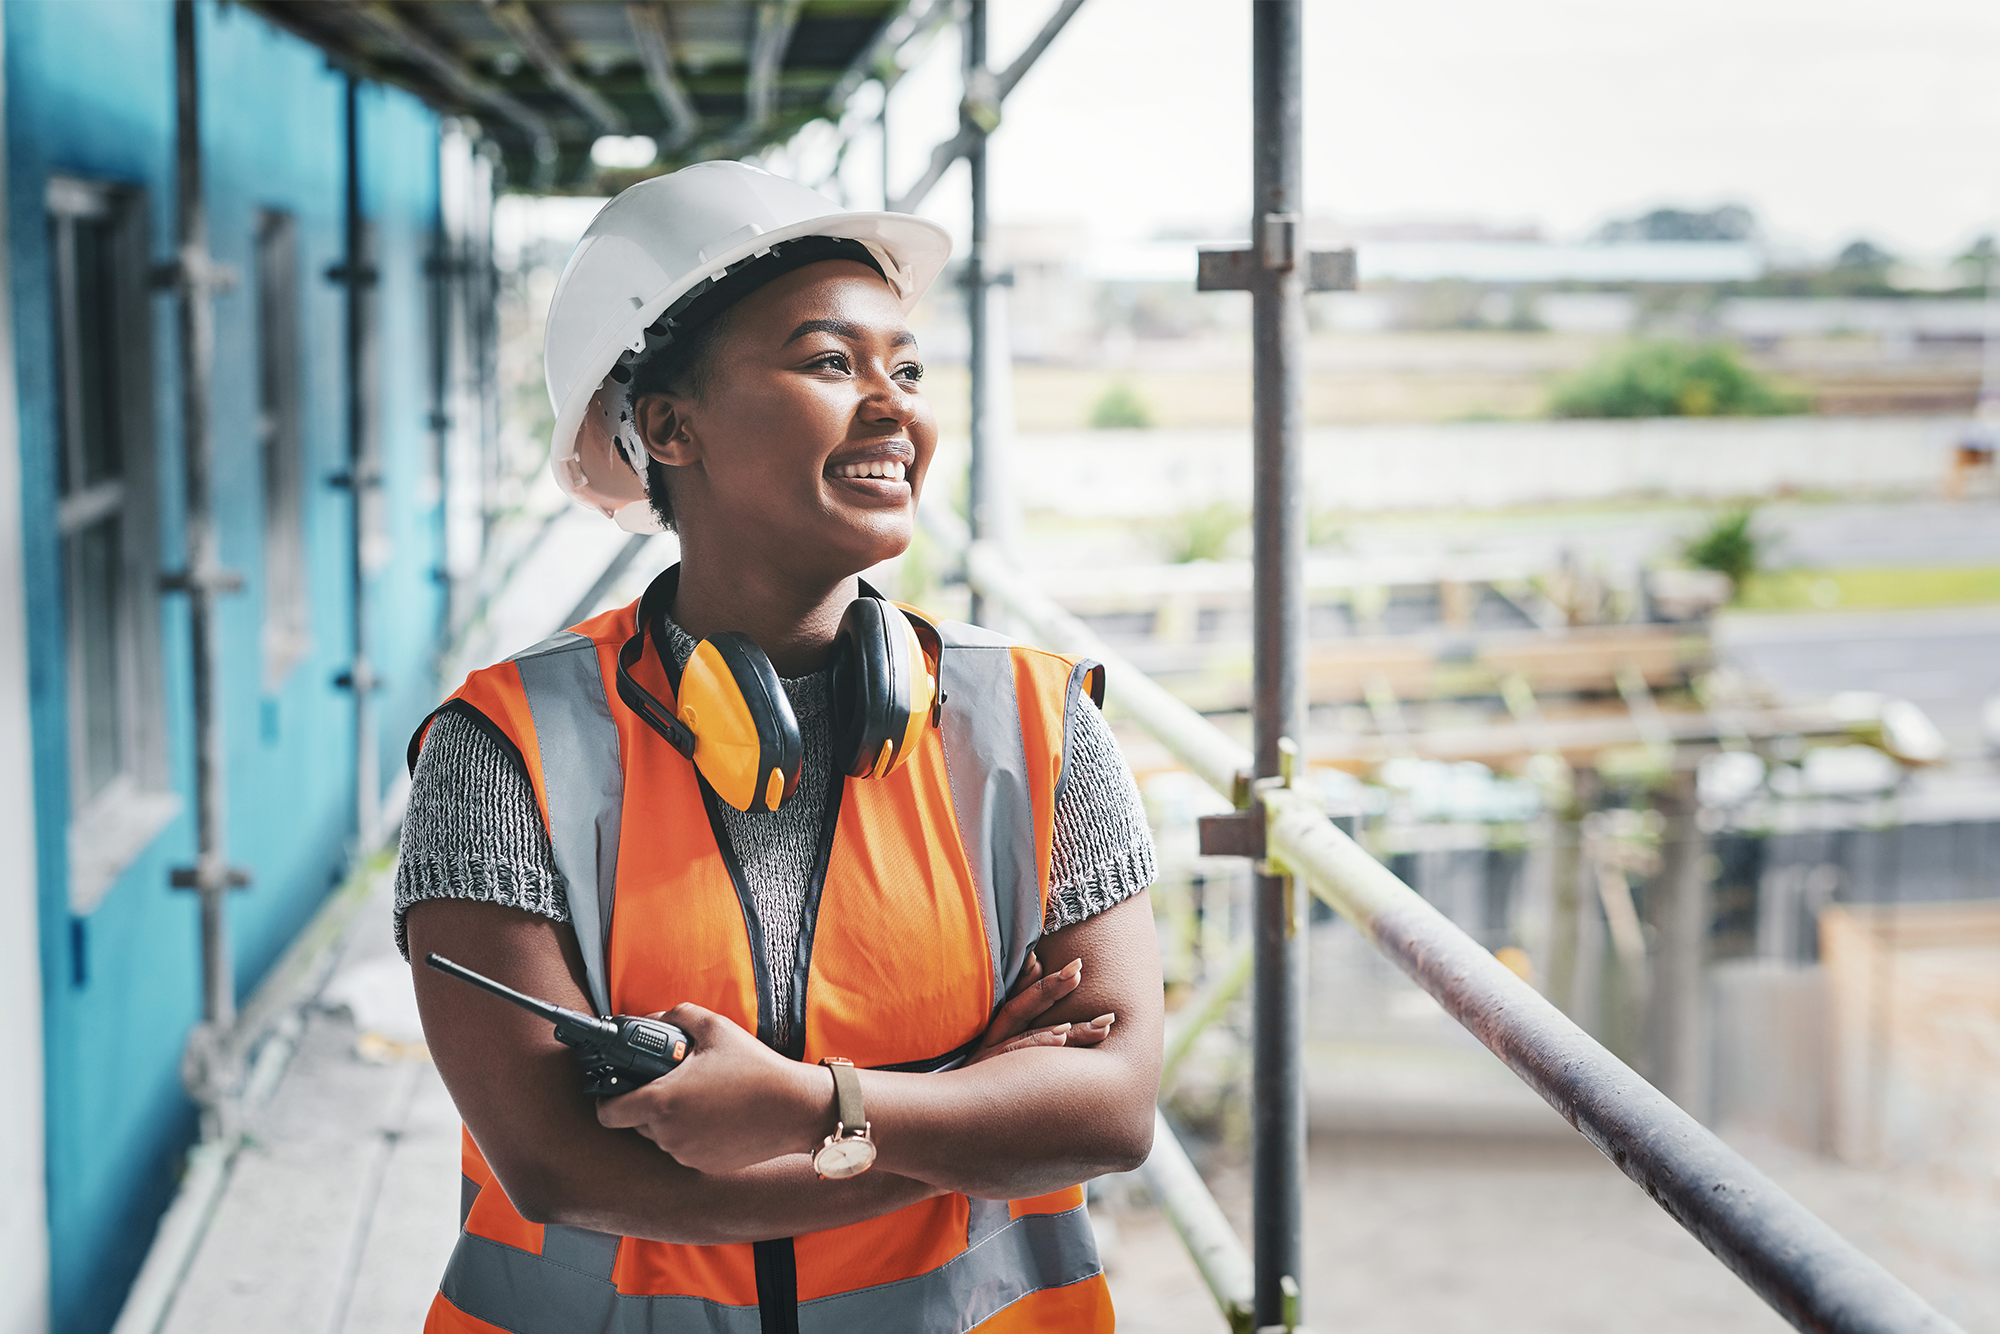 Personal Protective Equipment Considerations for Women in Construction: A female construction worker on a job site. PPE for women in construction is an important aspect of safety.